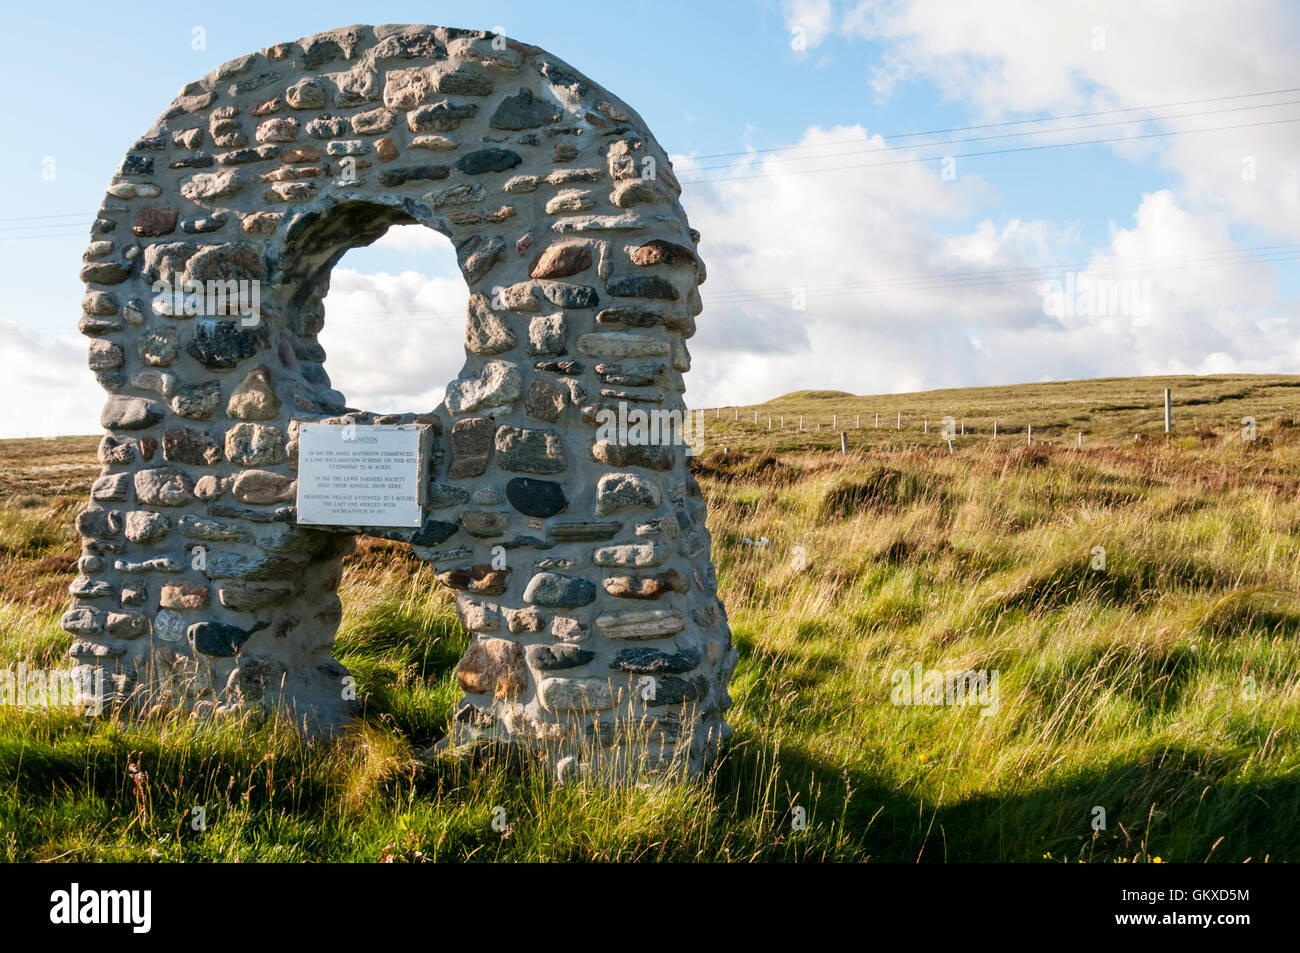 Monument to agricultural experiment of Deanston on Isle of Lewis.  SEE DETAILS IN DESCRIPTION. Stock Photo